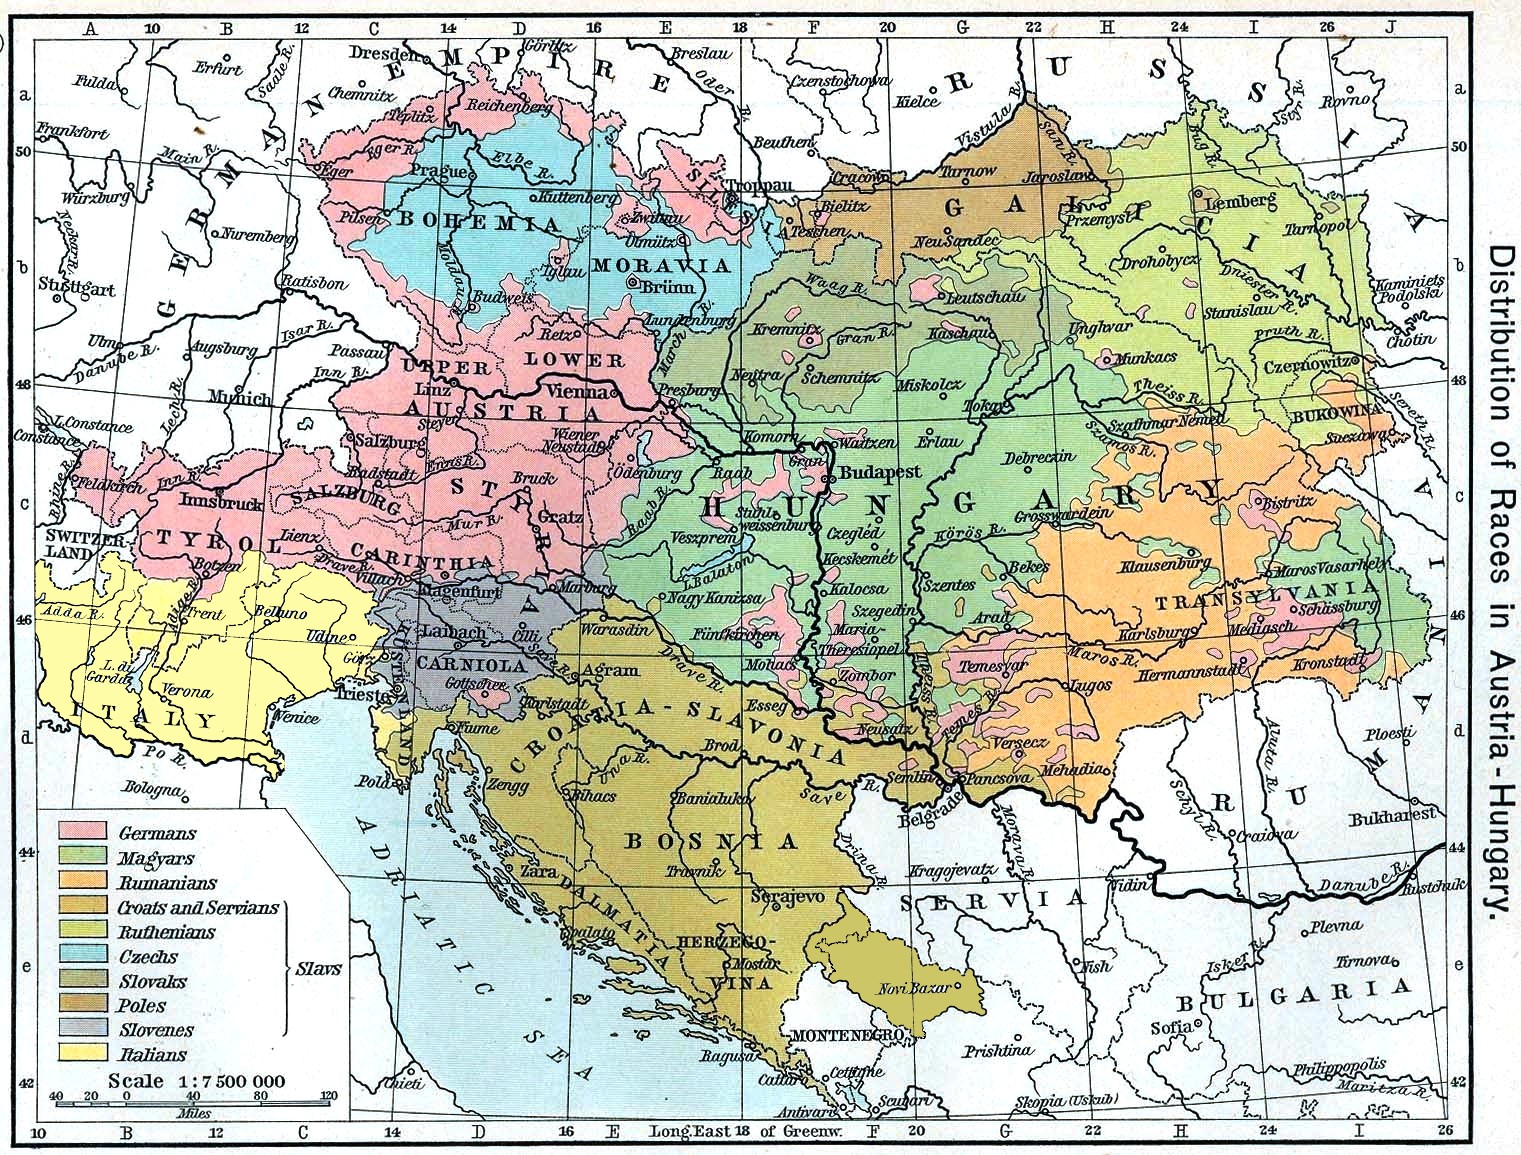 "Distribution of the Races of Austria-Hungary," from the Historical Atlas by William R. Shepherd, 1911